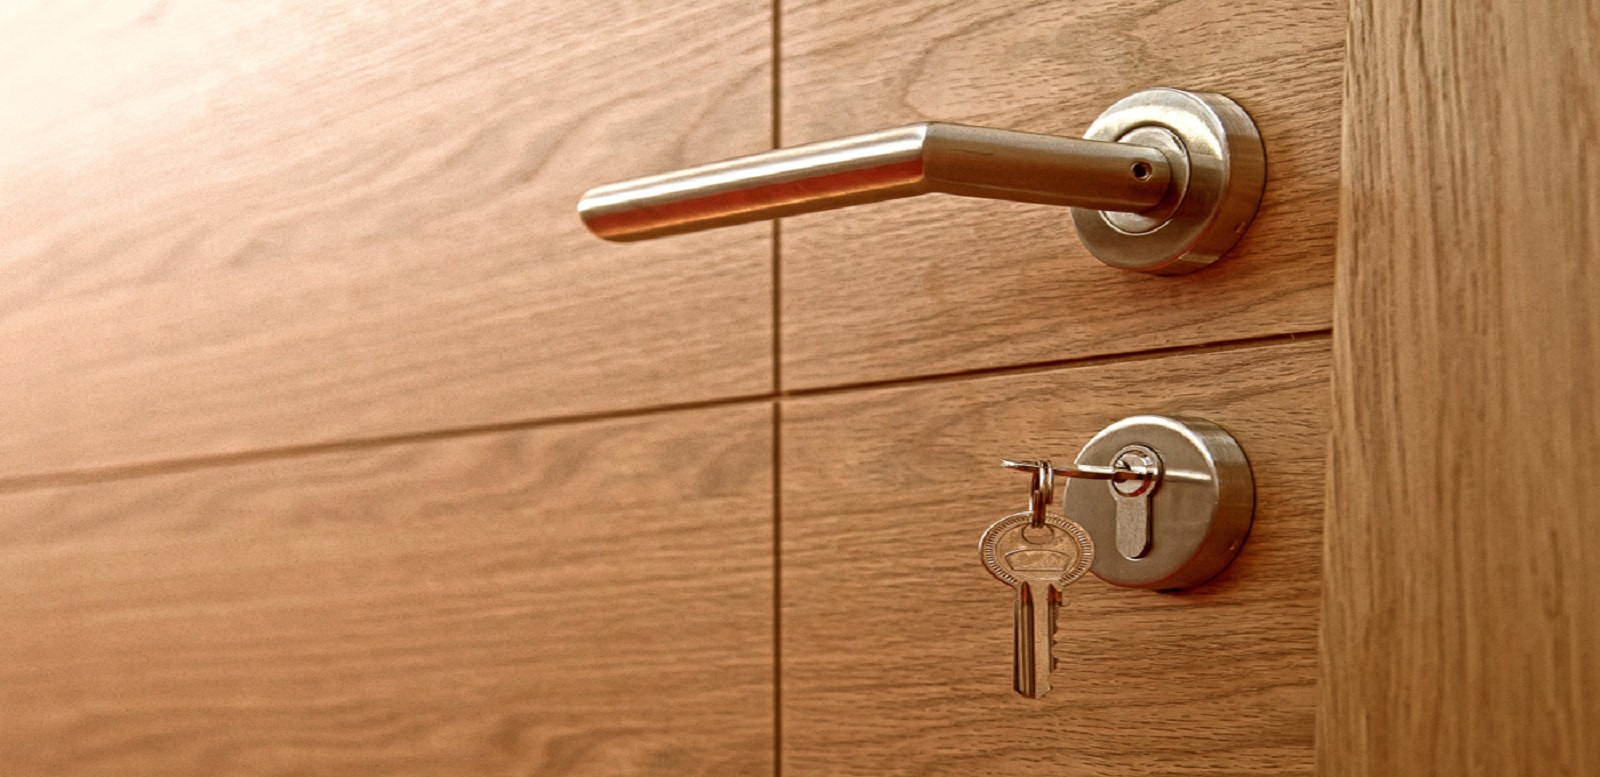 5 Easy Tips to Maintain Your Door Locks: Listen to Your 24 Hour Locksmith